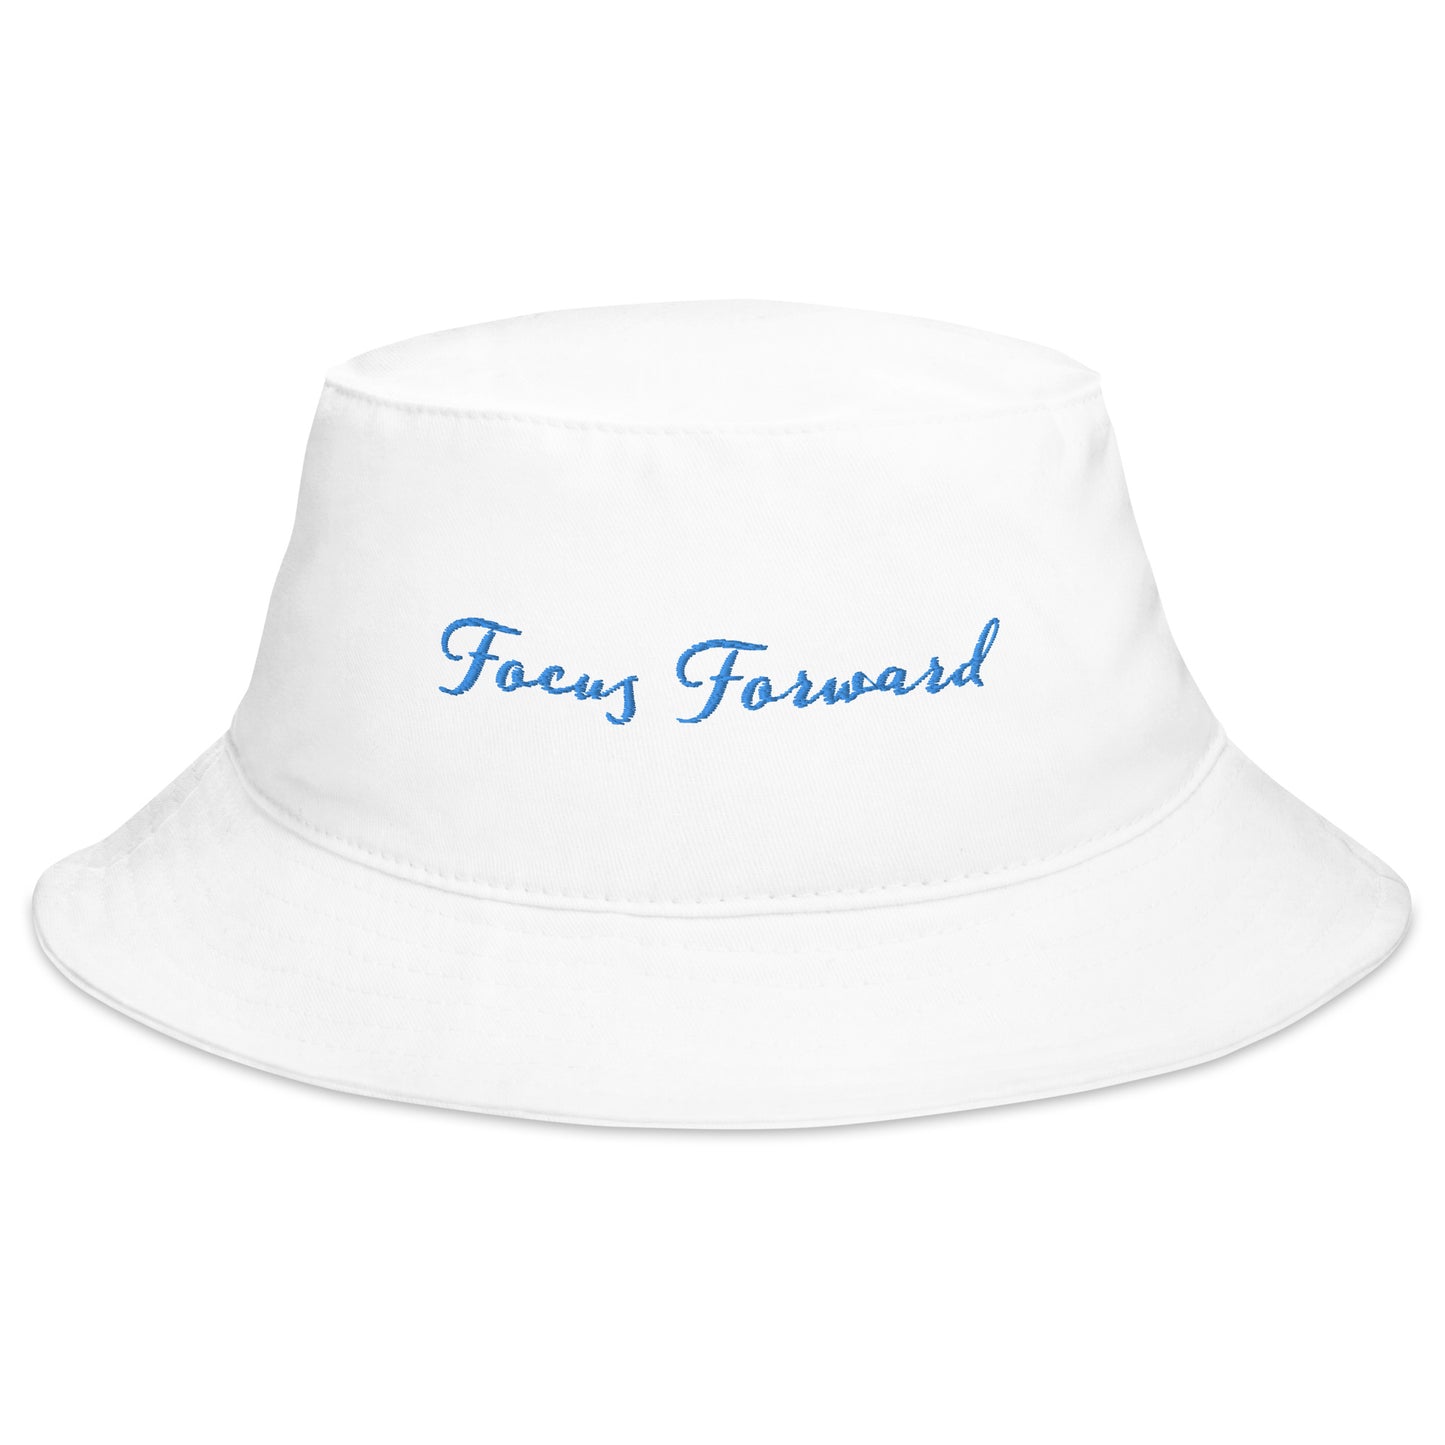 New Black and Blue Focus Forward Bucket Hat